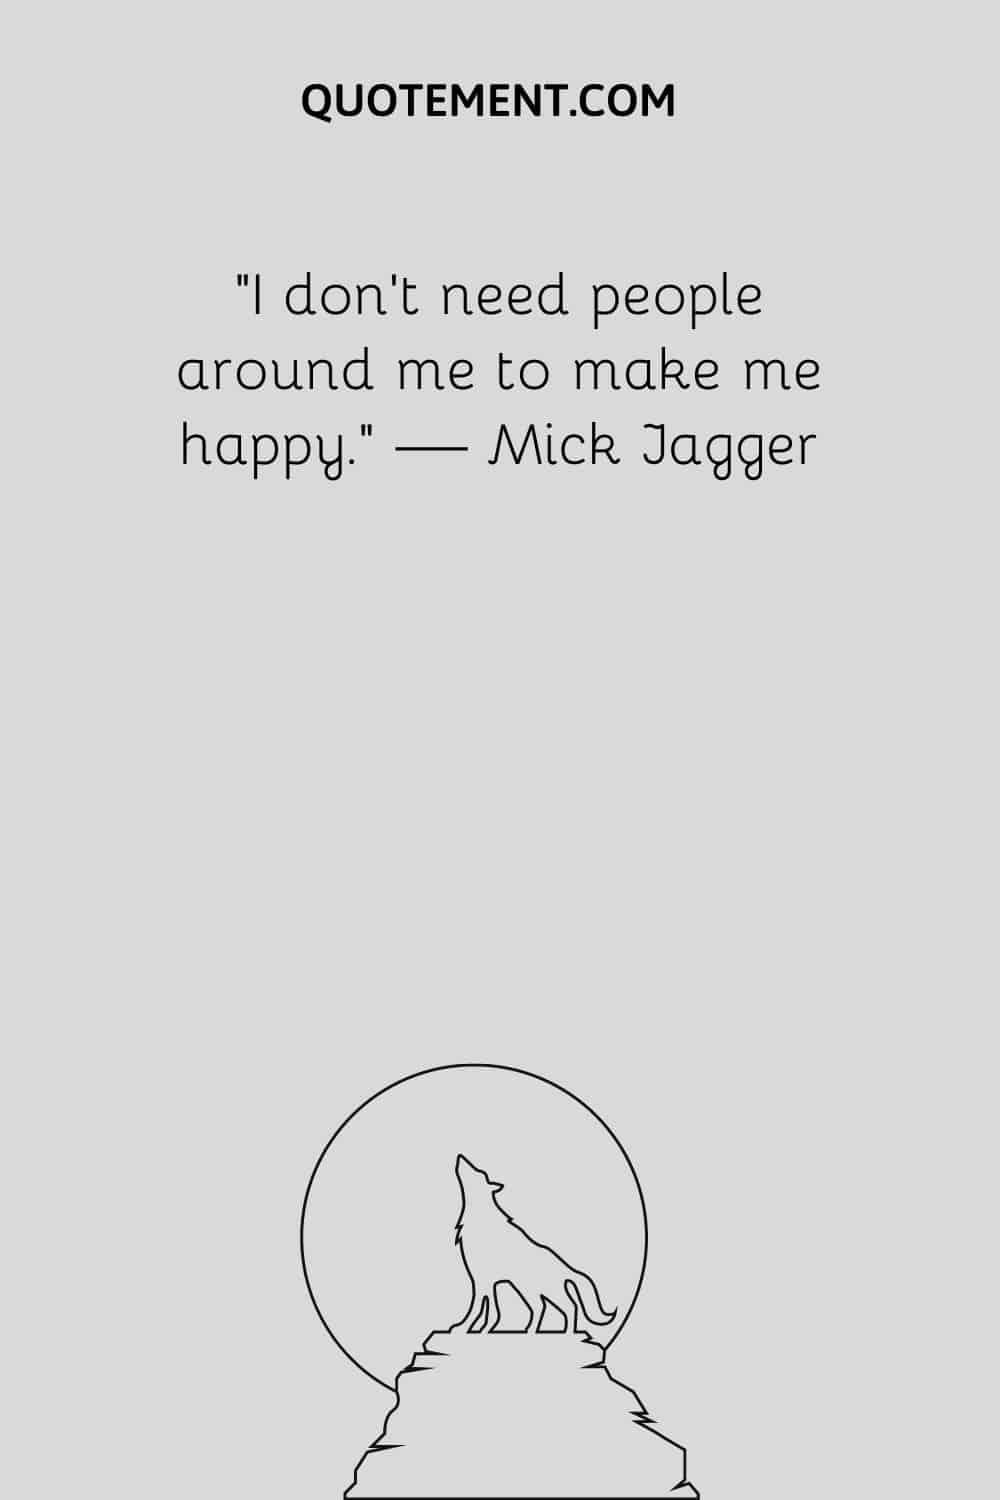 I don’t need people around me to make me happy